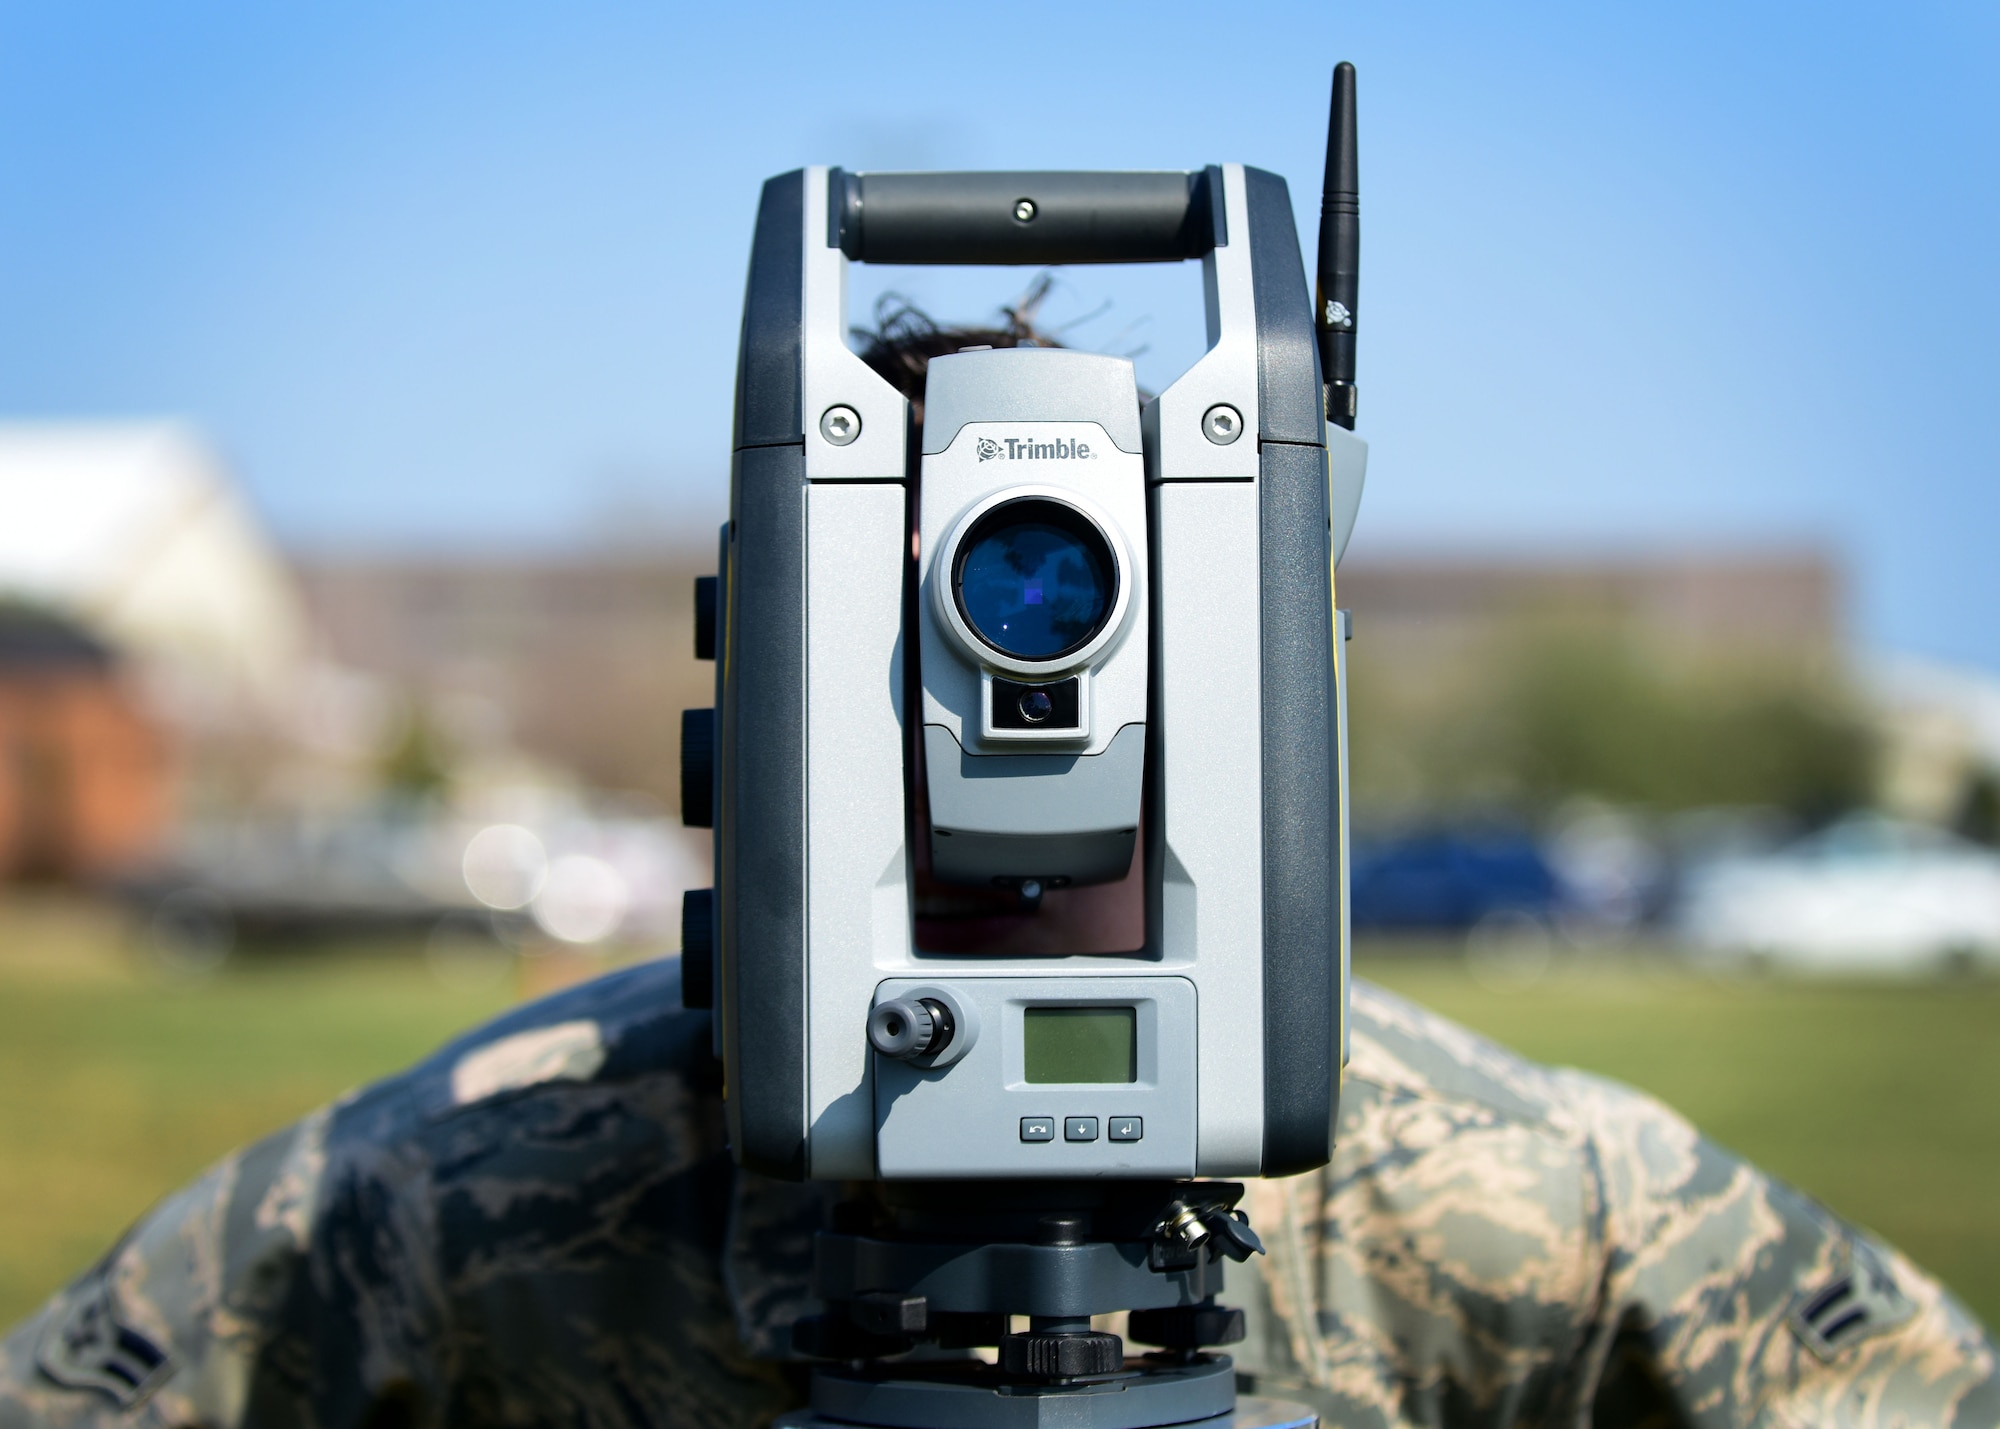 U.S. Air Force Airman 1st Class Ryan Mundt, 633rd Civil Engineer Squadron engineering technician, prepares for an optical site survey, at Joint Base Langley-Eustis, Va., March 9, 2017. Mundt is a member of the mapping section, which keeps track of the location of a variety of items on base, including hunting stands, electrical and telephone lines, abandoned lines, water, sewage and stop signs on JBLE. (U.S. Air Force photo/Senior Airman Areca T. Bell)